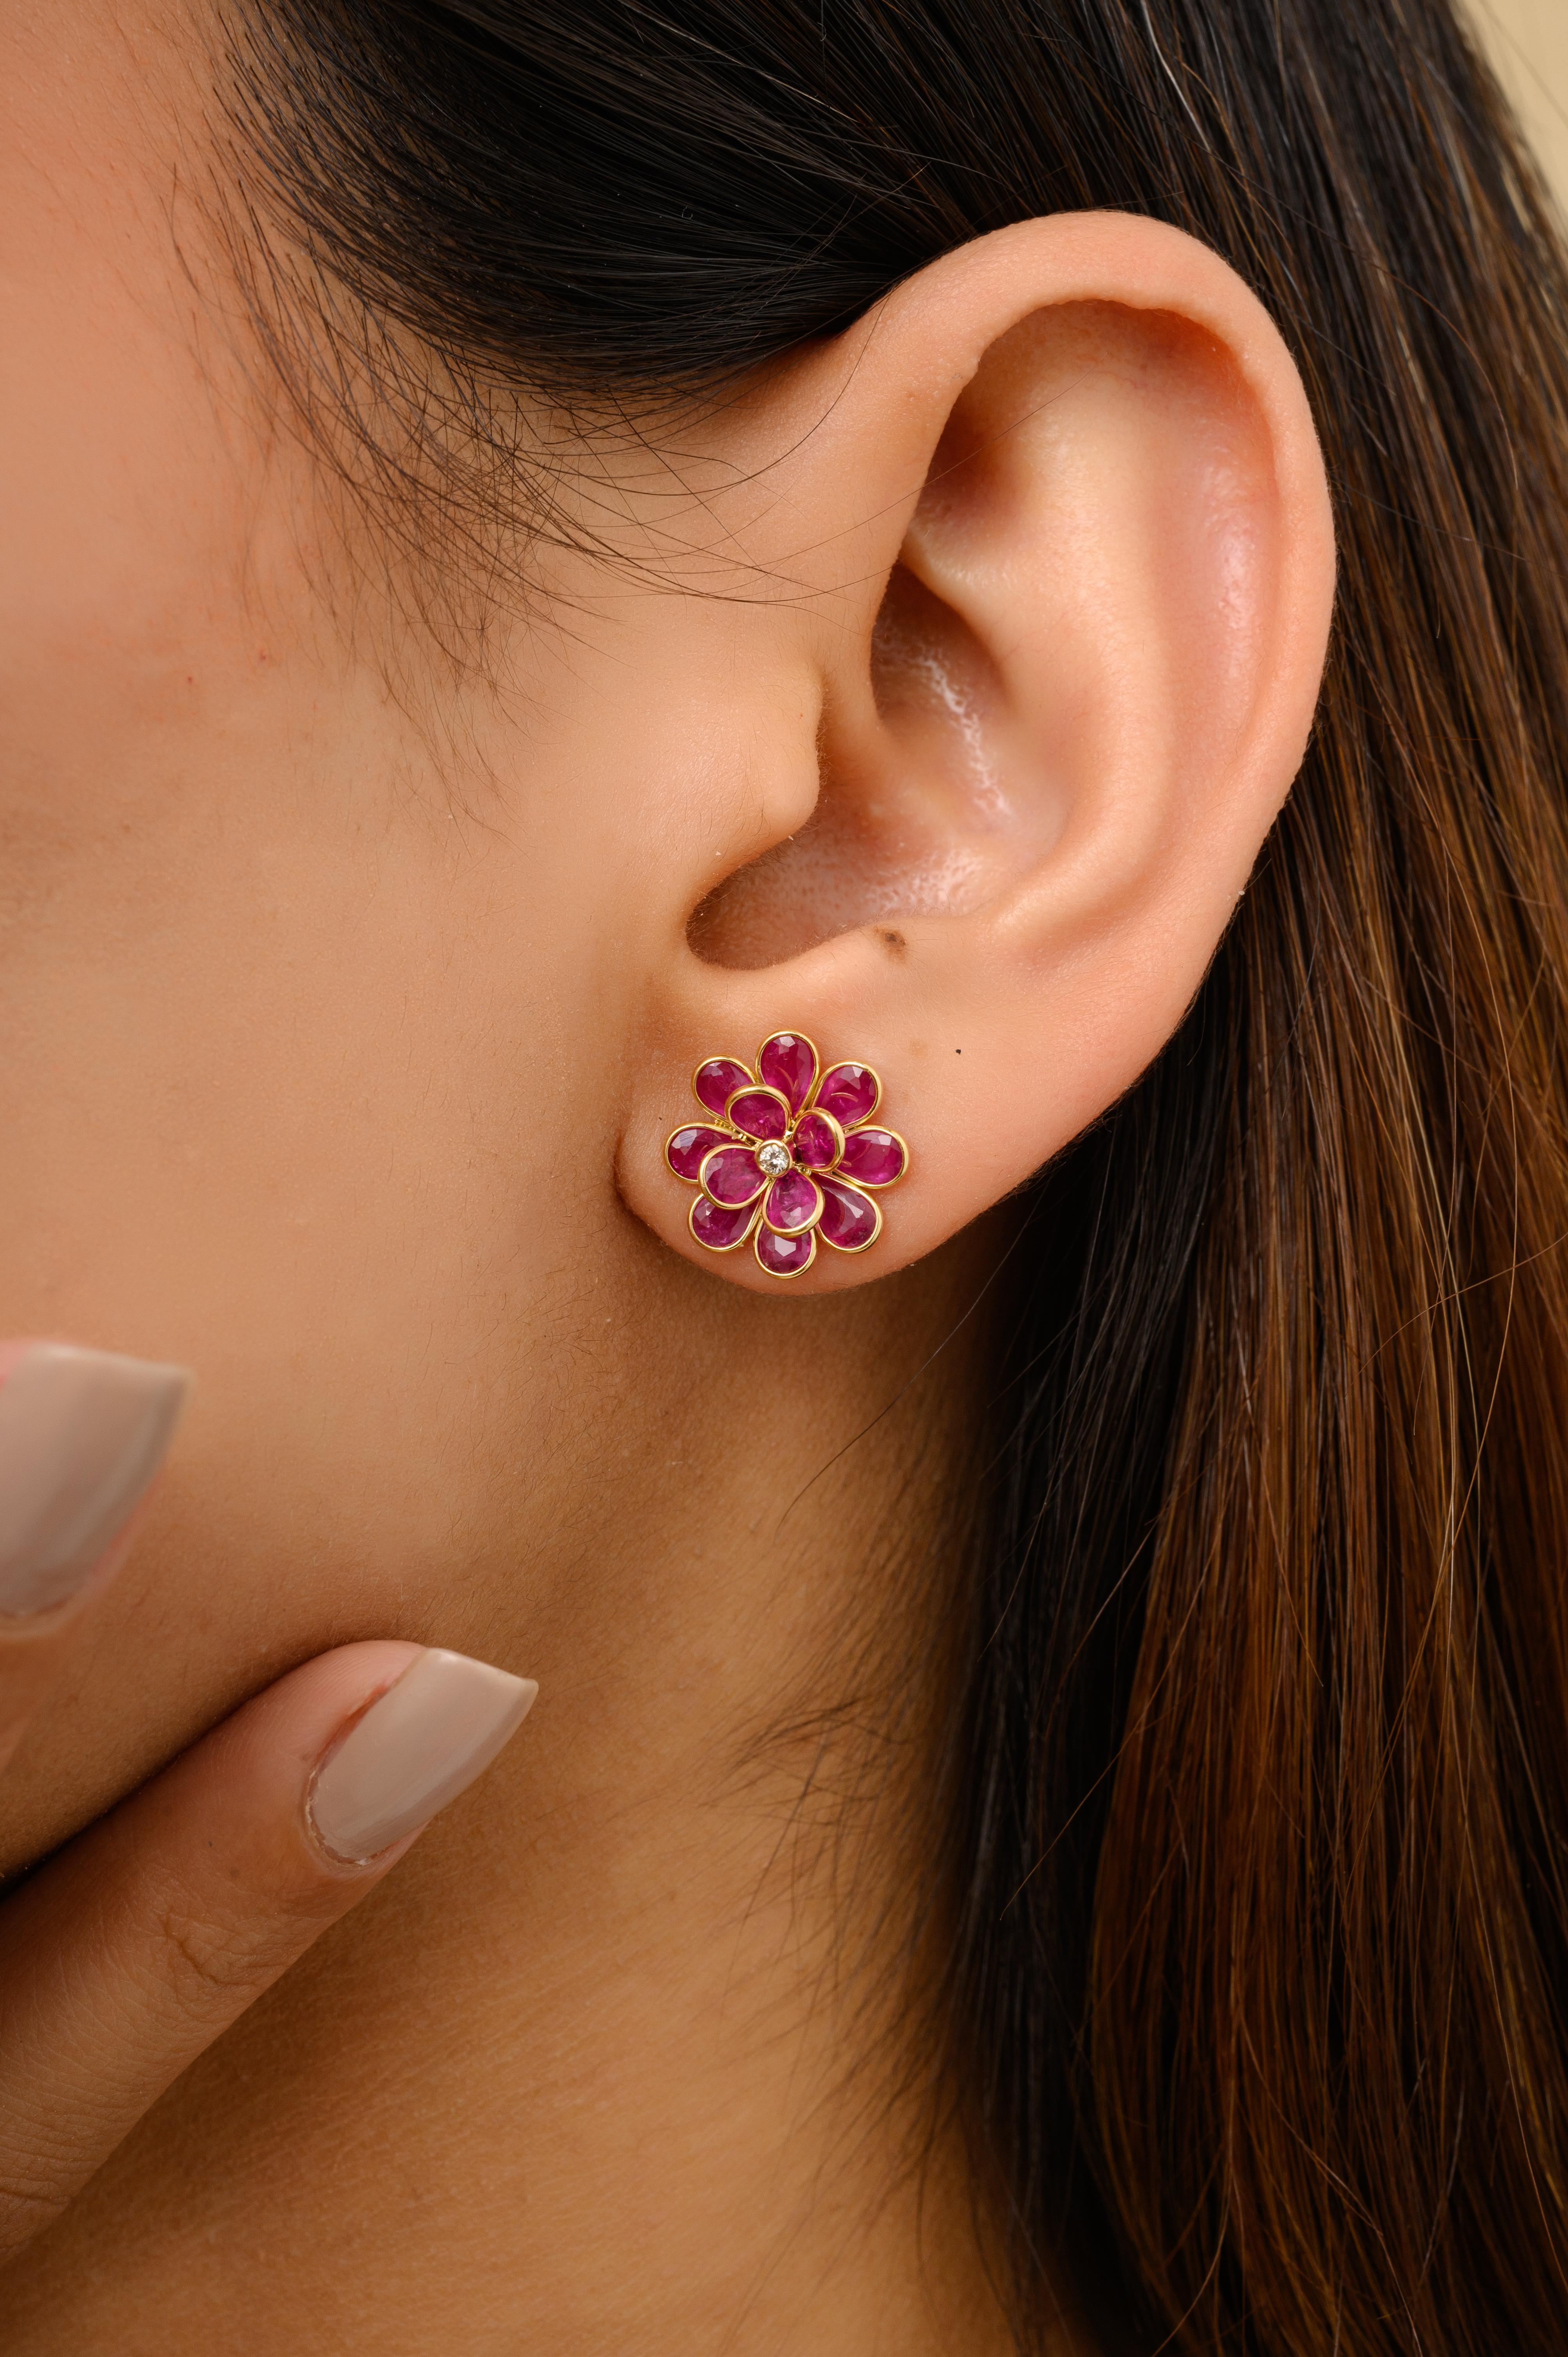 Statement Ruby Blazing Flower Stud Earrings with Diamond in 18K Gold to make a statement with your look. You shall need stud earrings to make a statement with your look. These earrings create a sparkling, luxurious look featuring pear cut ruby.
Ruby